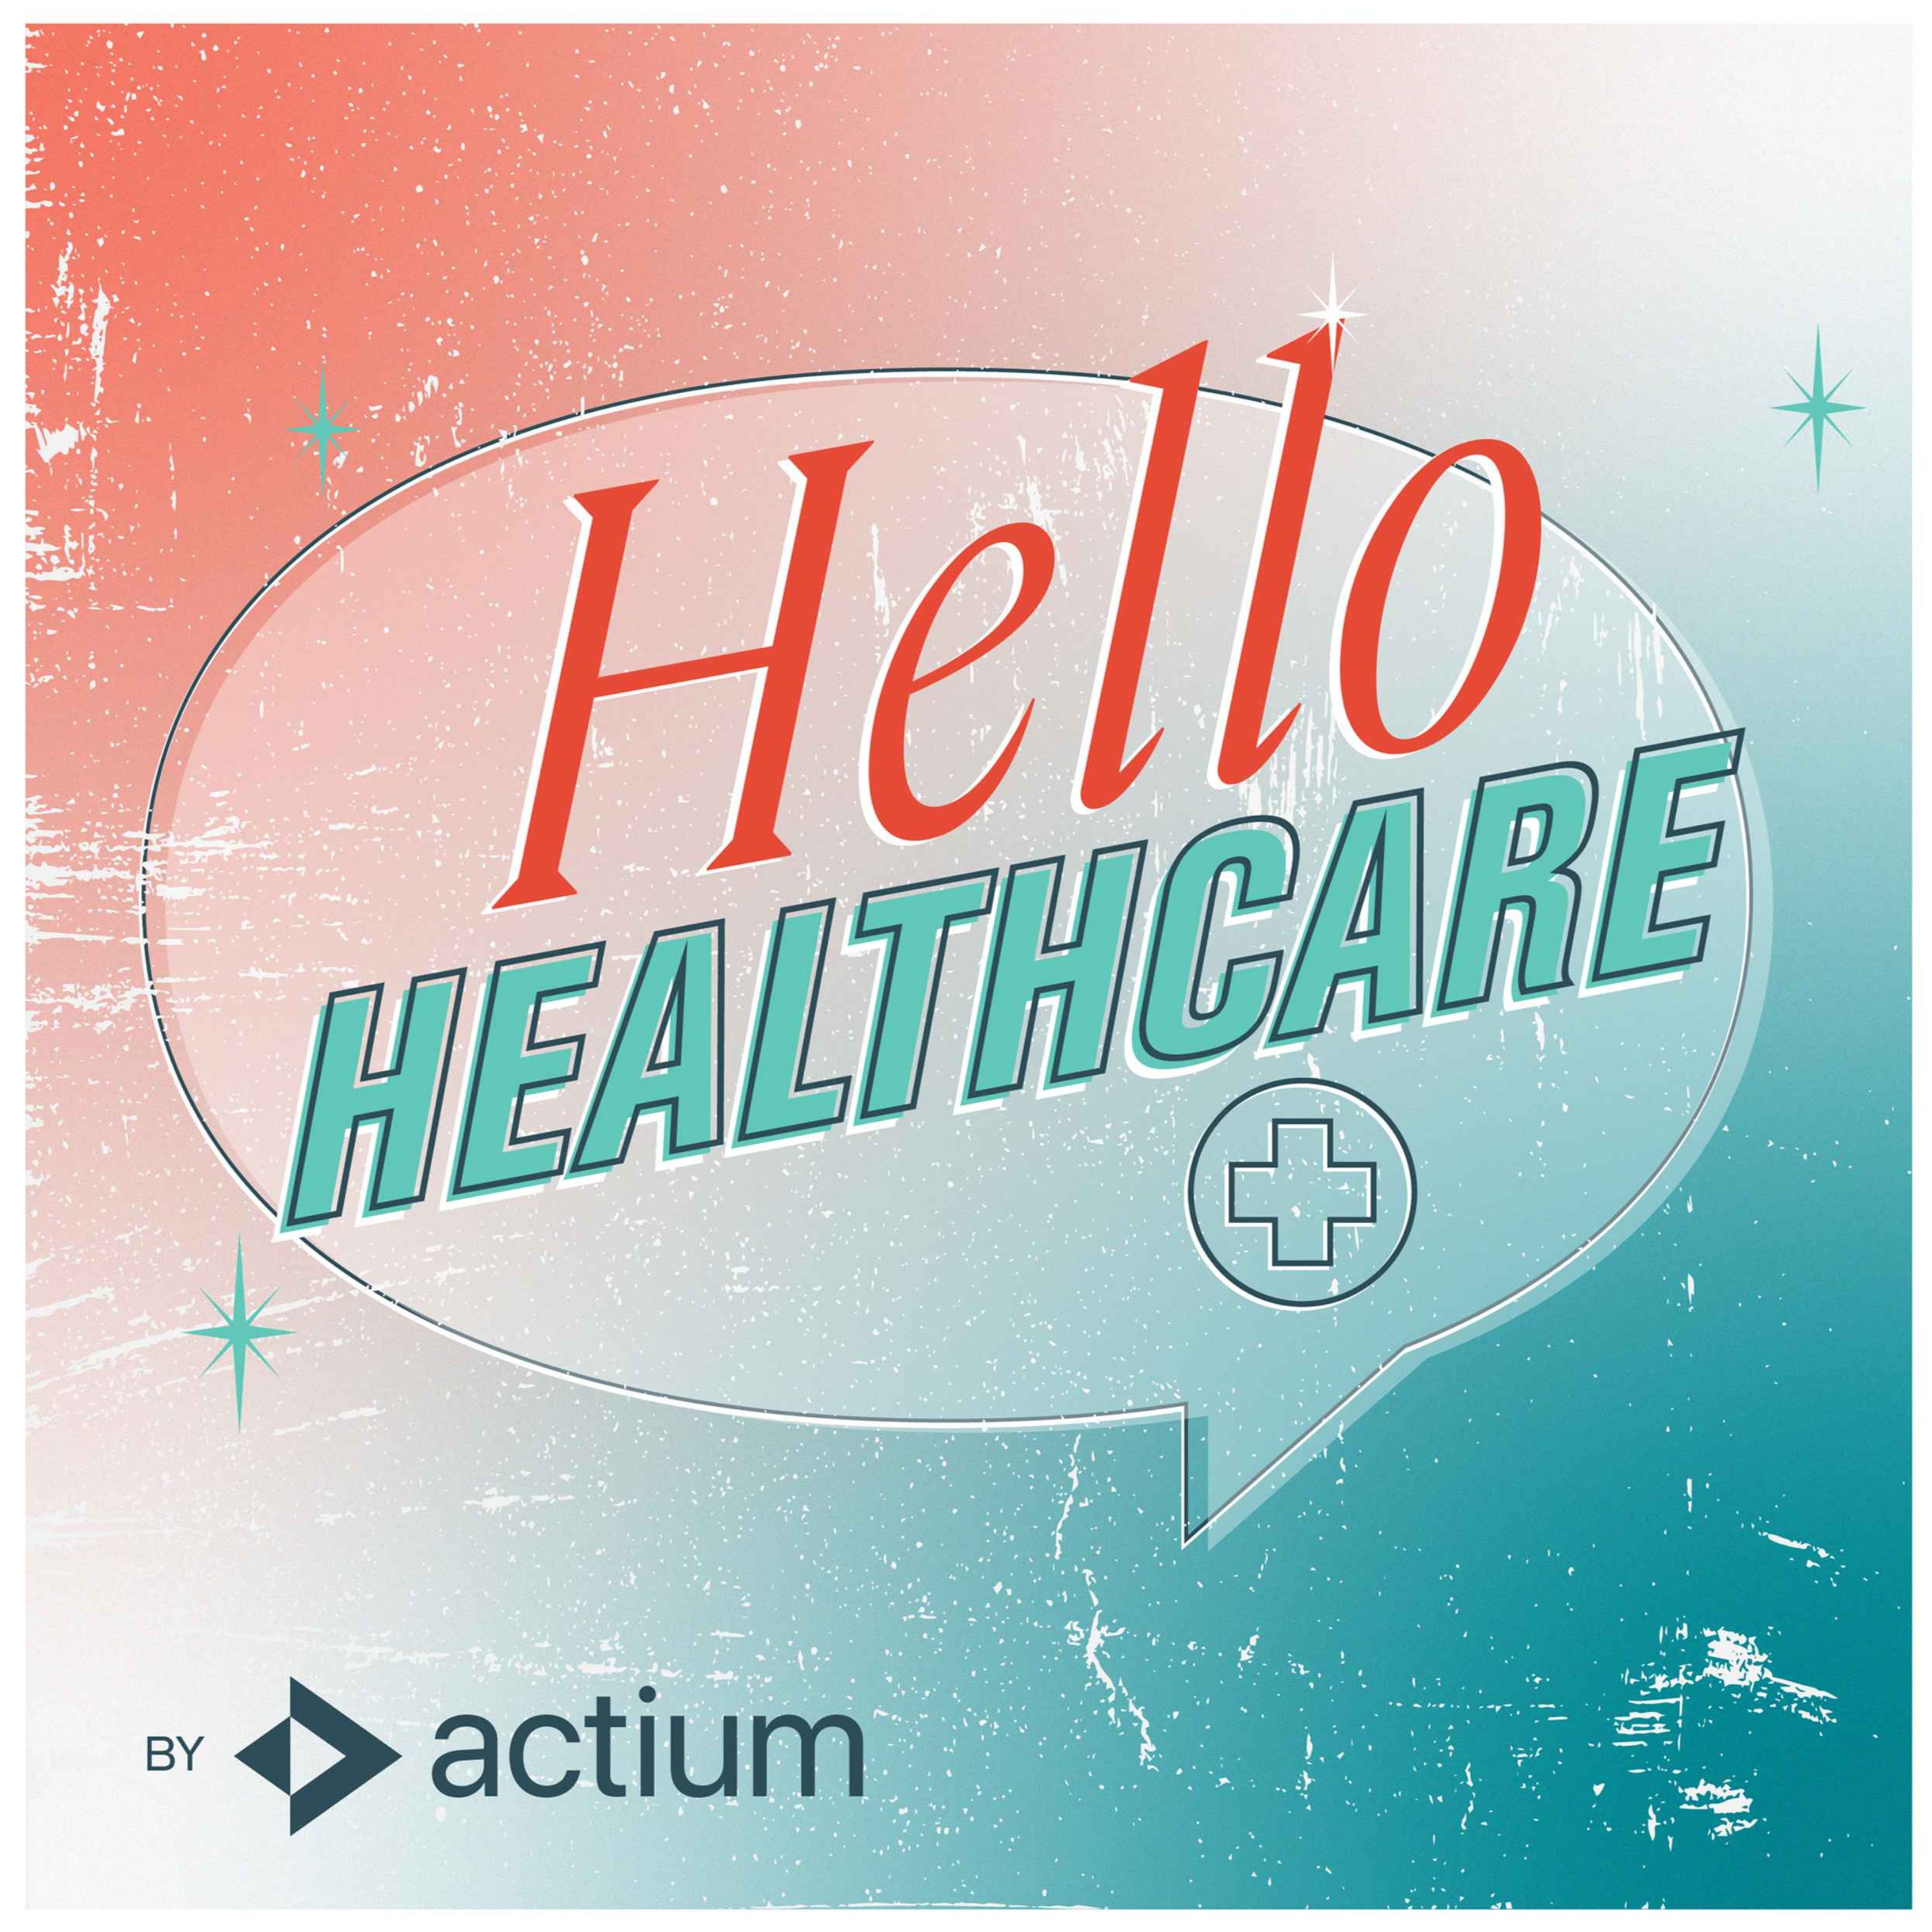 Data-Driven CRM Strategies in Healthcare ft. Chris Dufresne, VP of Digital Products, Allina Health